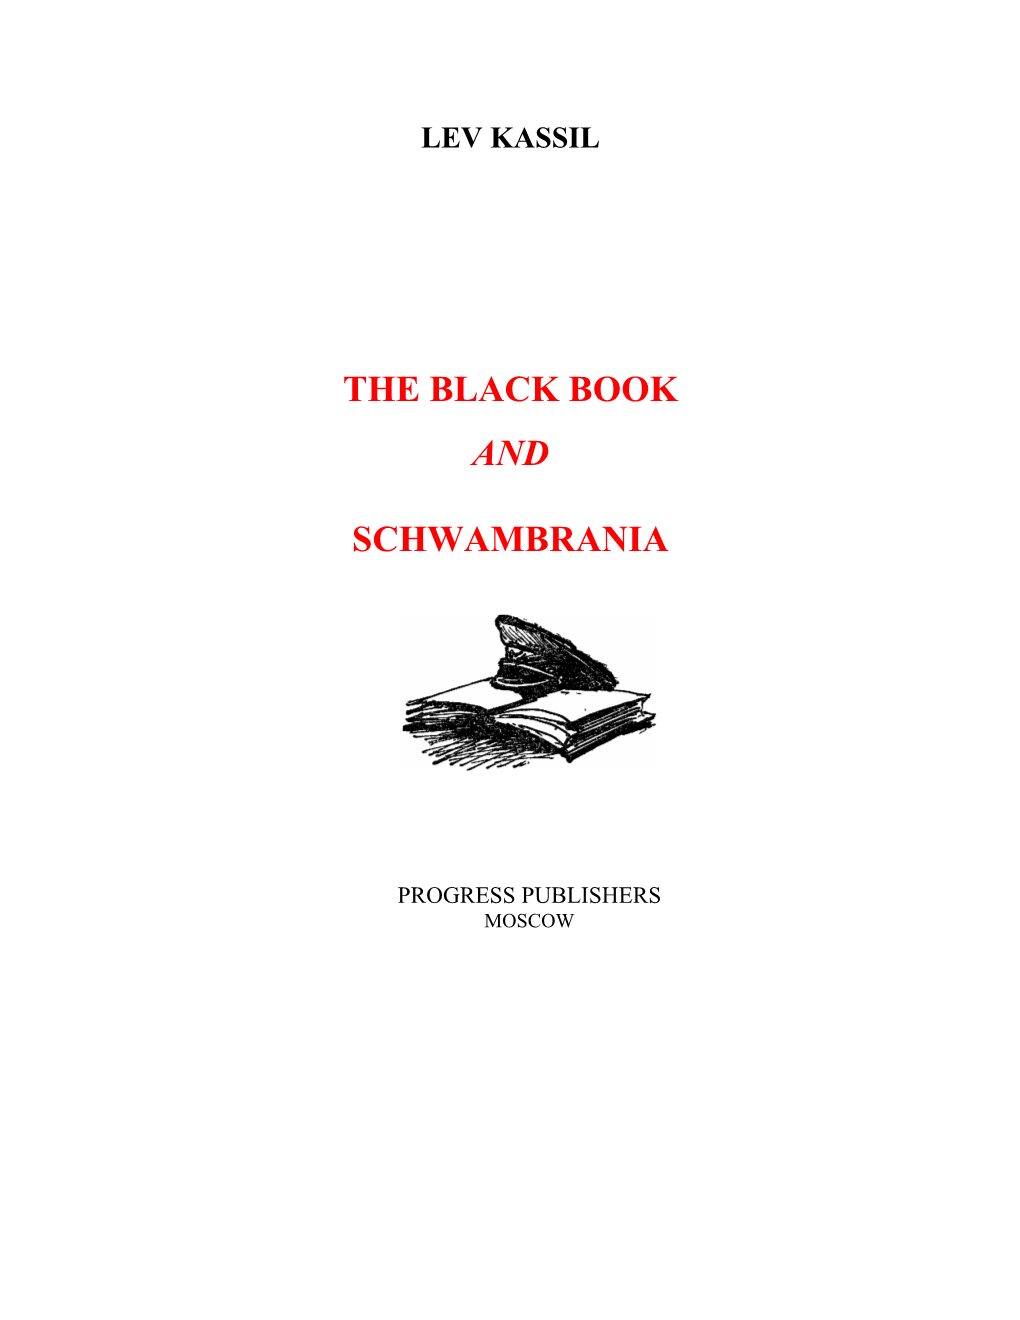 The Black Book and Schwambrania